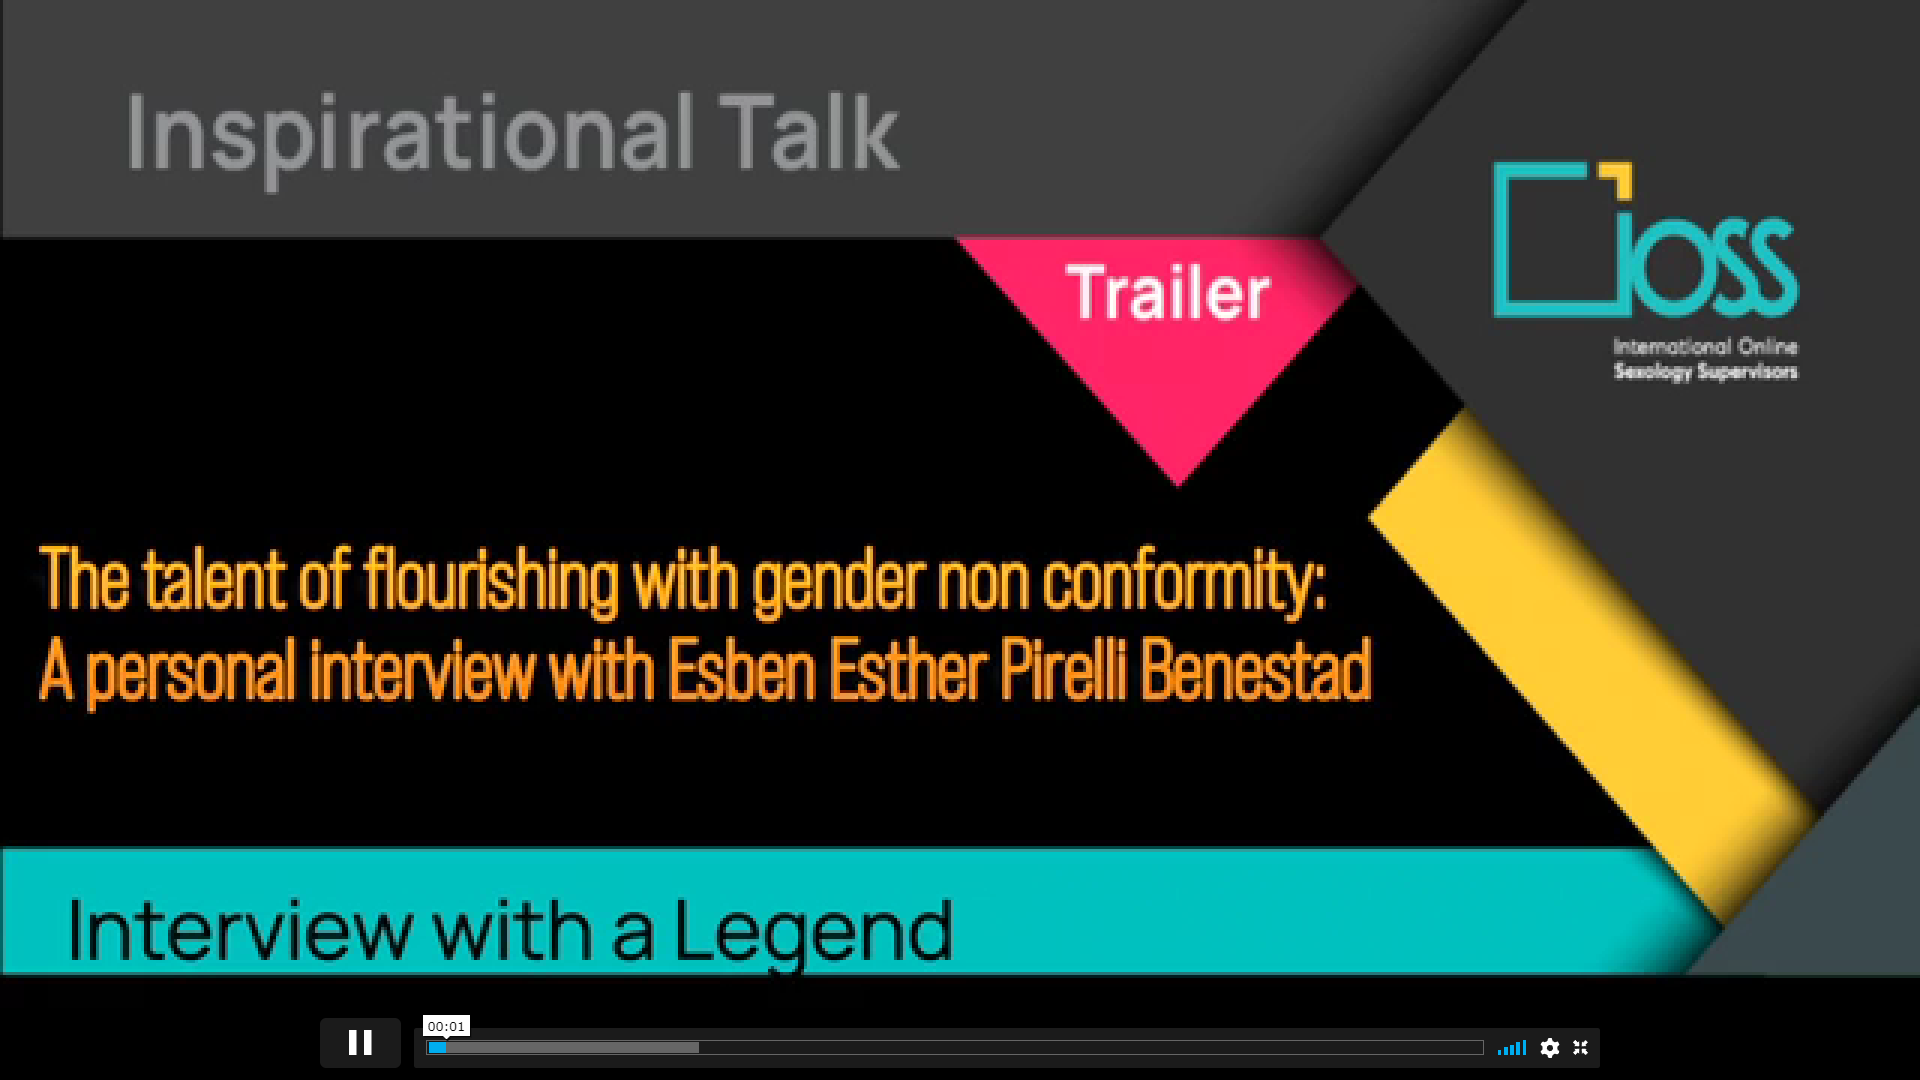 Trailer The talent of flourishing with gender non conformity: A personal interview with Esben Esther Pirelli Benestad (Part 1 & 2)